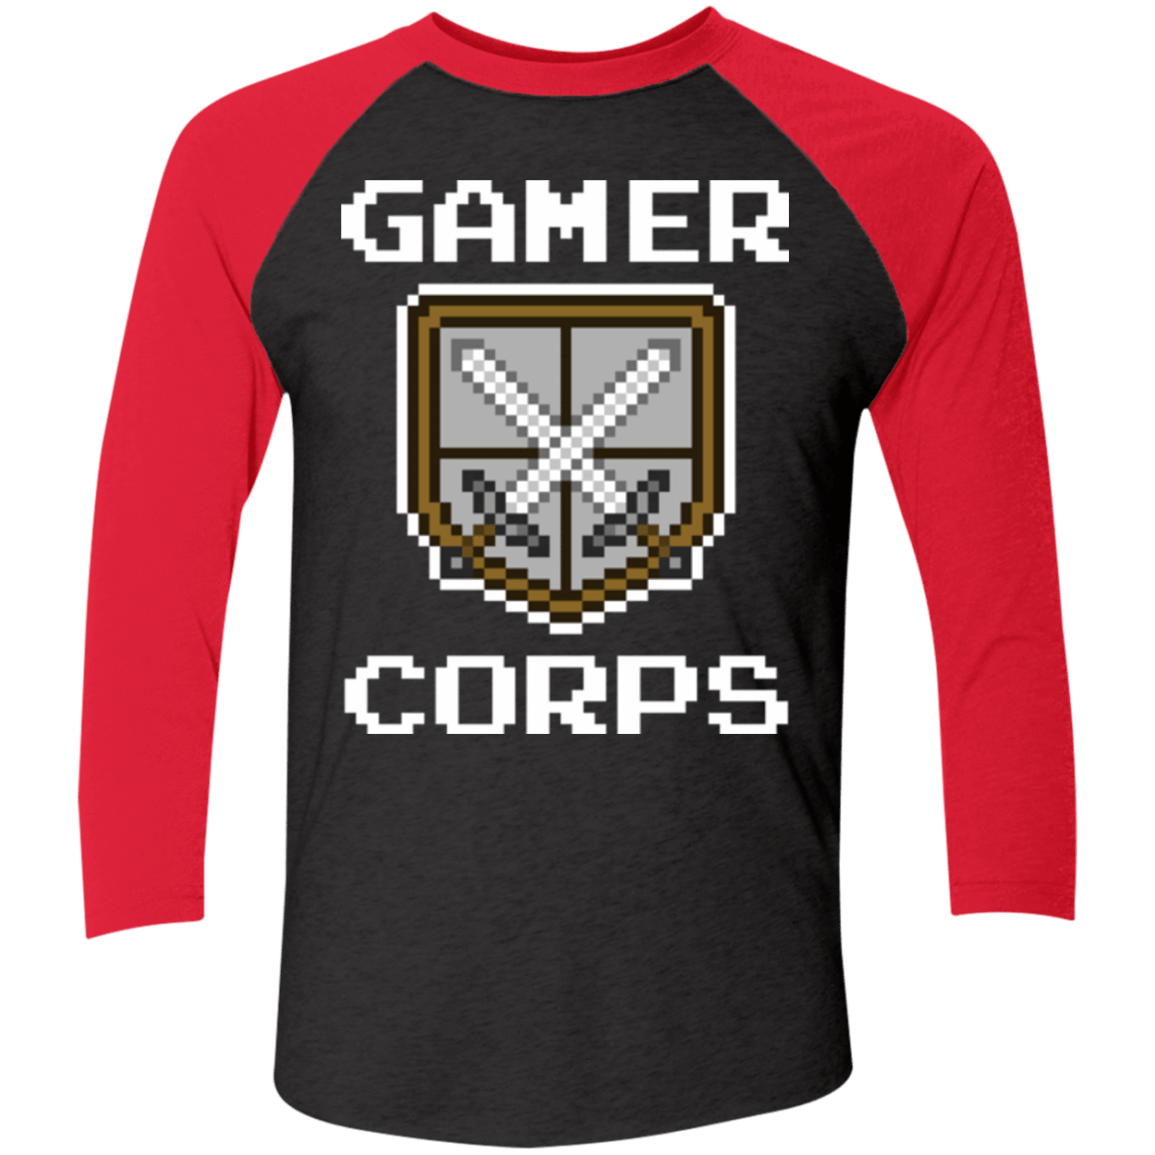 T-Shirts Vintage Black/Vintage Red / X-Small Gamer corps Men's Triblend 3/4 Sleeve